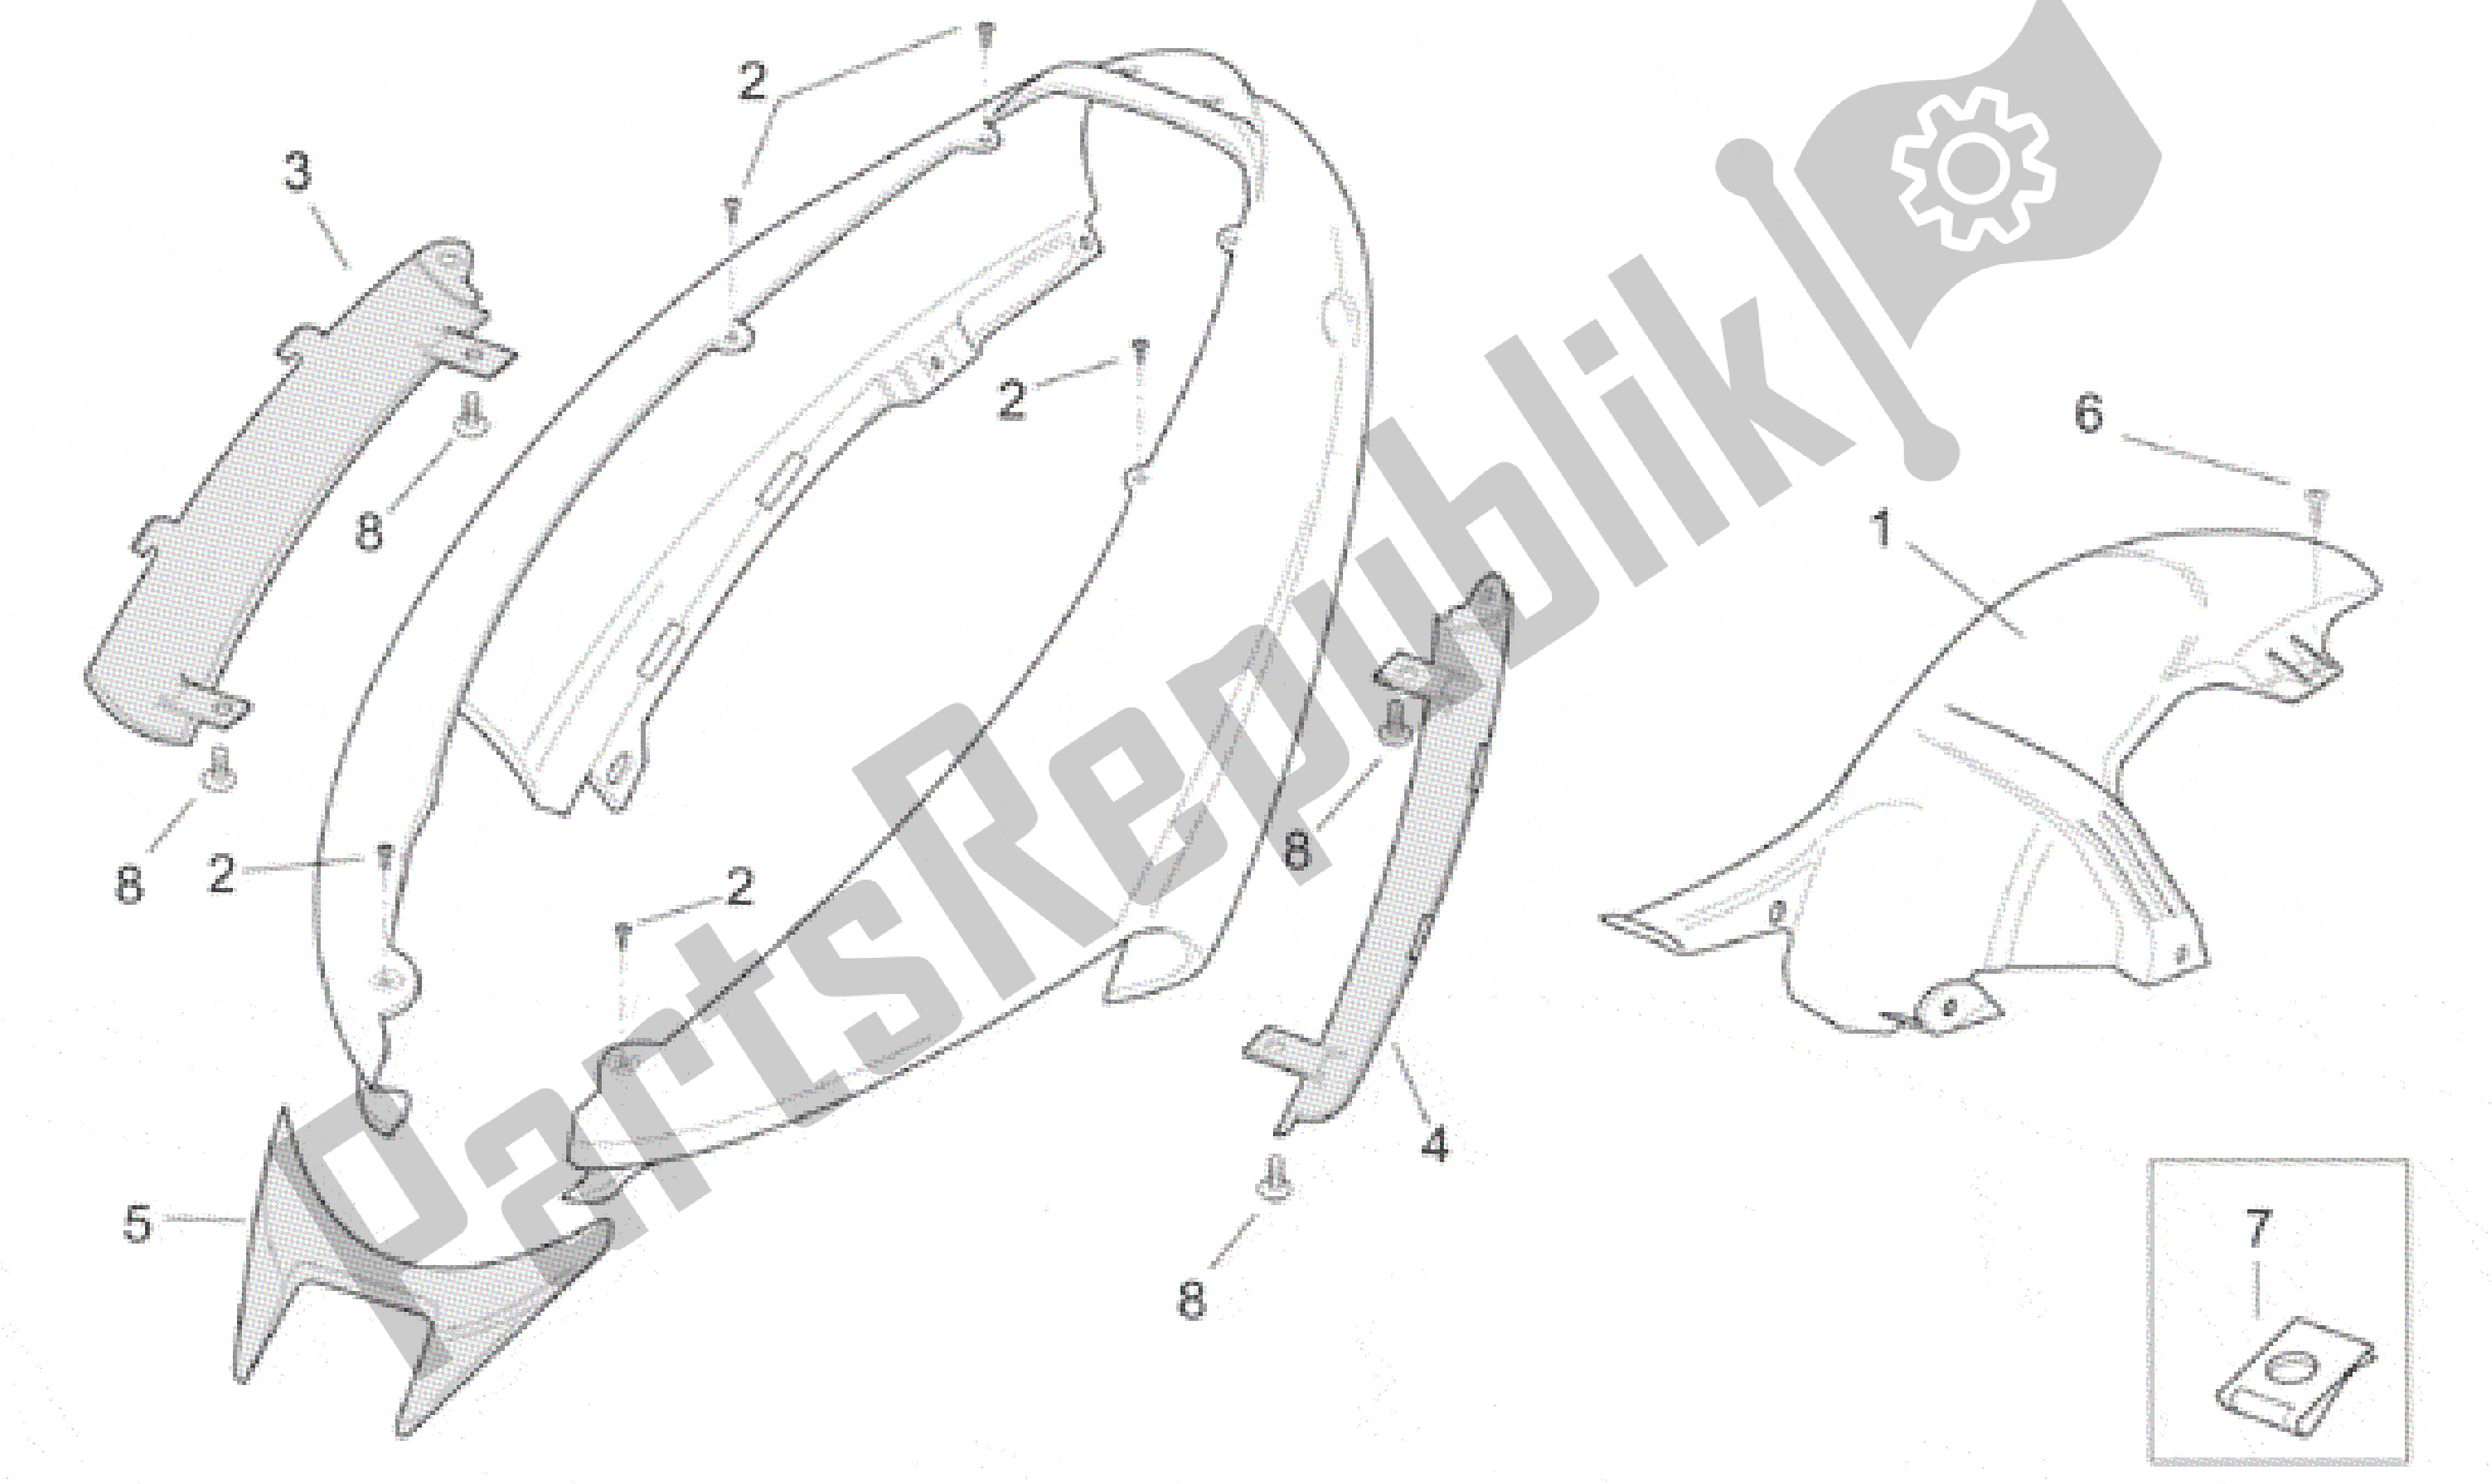 All parts for the Rear Body - Side Panels of the Aprilia SR 150 1999 - 2001